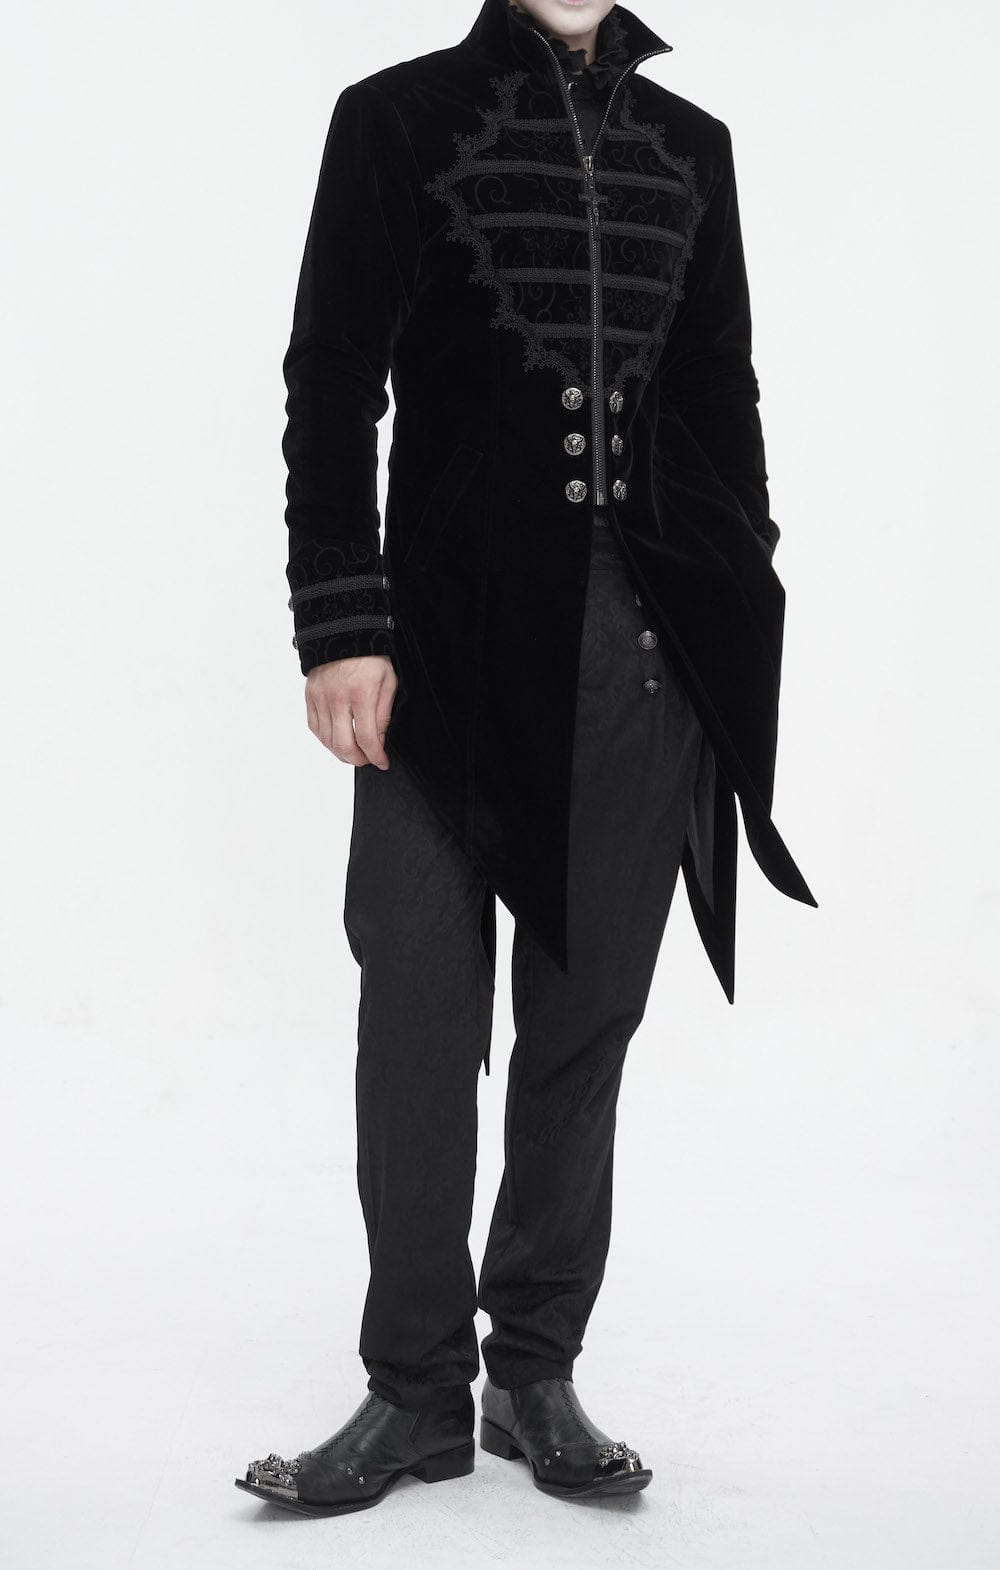 GOTHIC GROOM WEARING THE GOTHIC CHAOS MAGIC TAILCOAT IN BLACK VELVET WITH STRONG TAILORING AND ORNATE BRAID AND BUTTON DETAILS FROM DEVIL FASHION AT GALLERY SERPENTINE